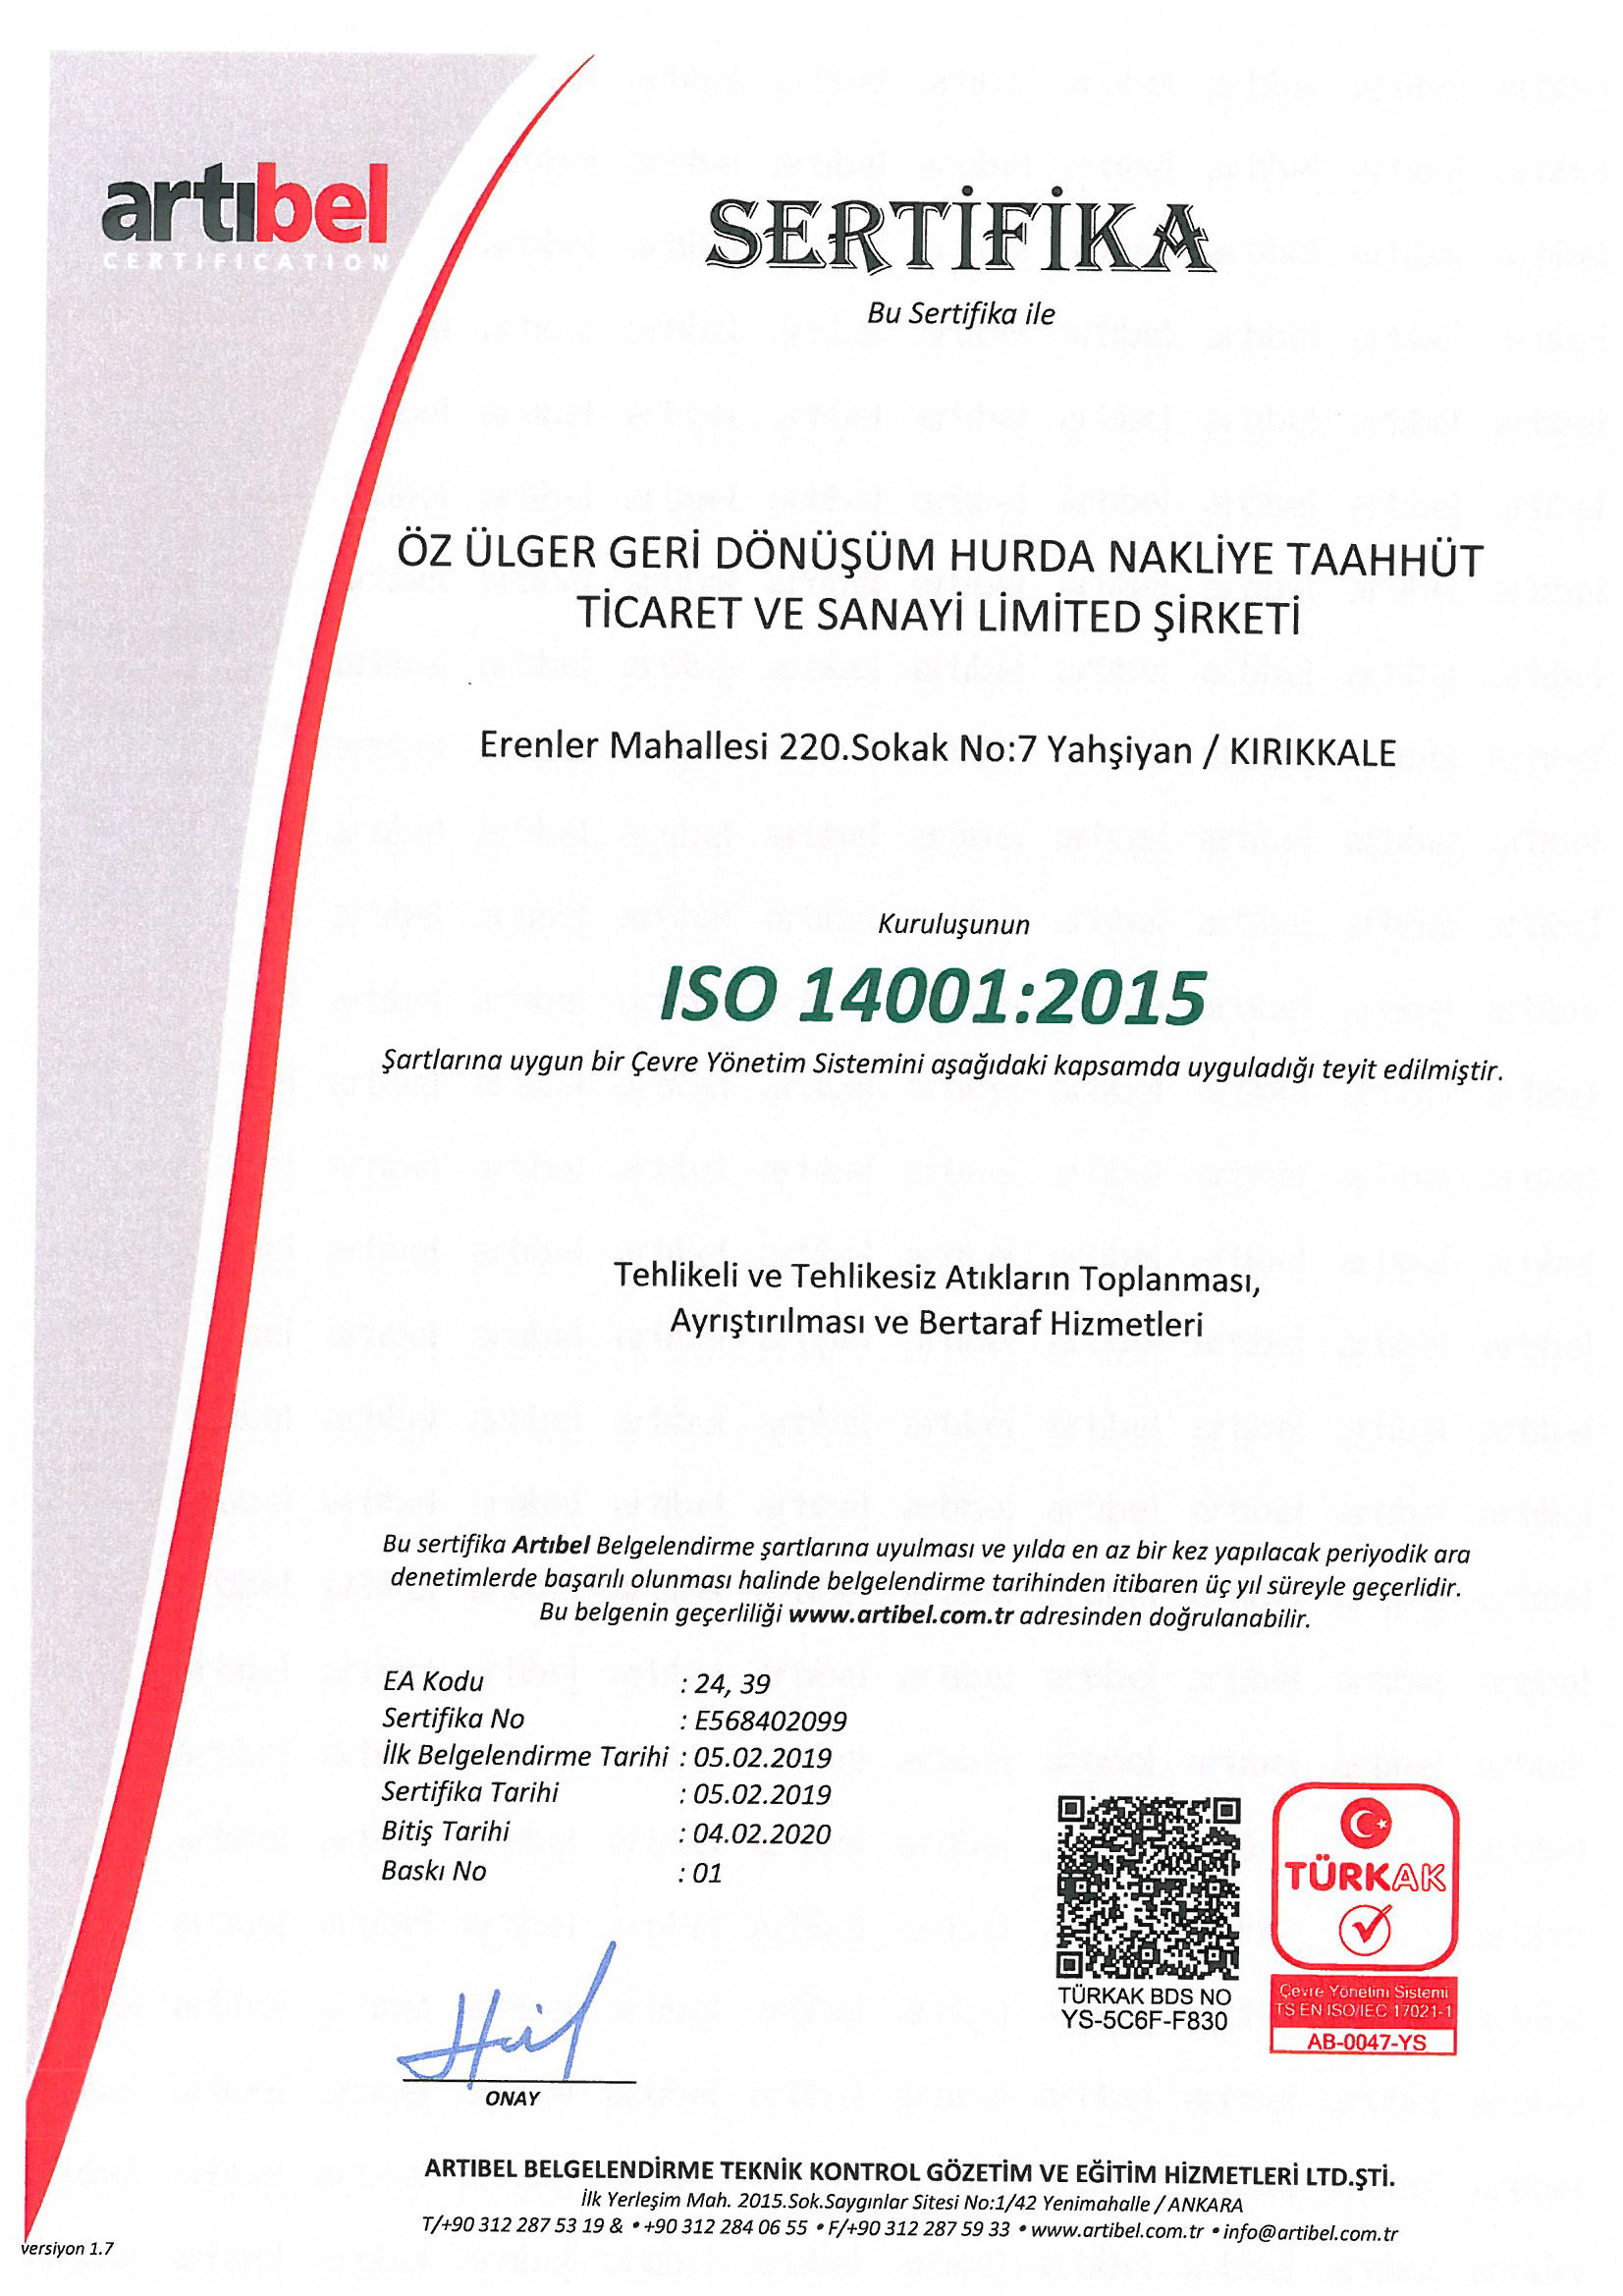 ISO 14001 - 2004